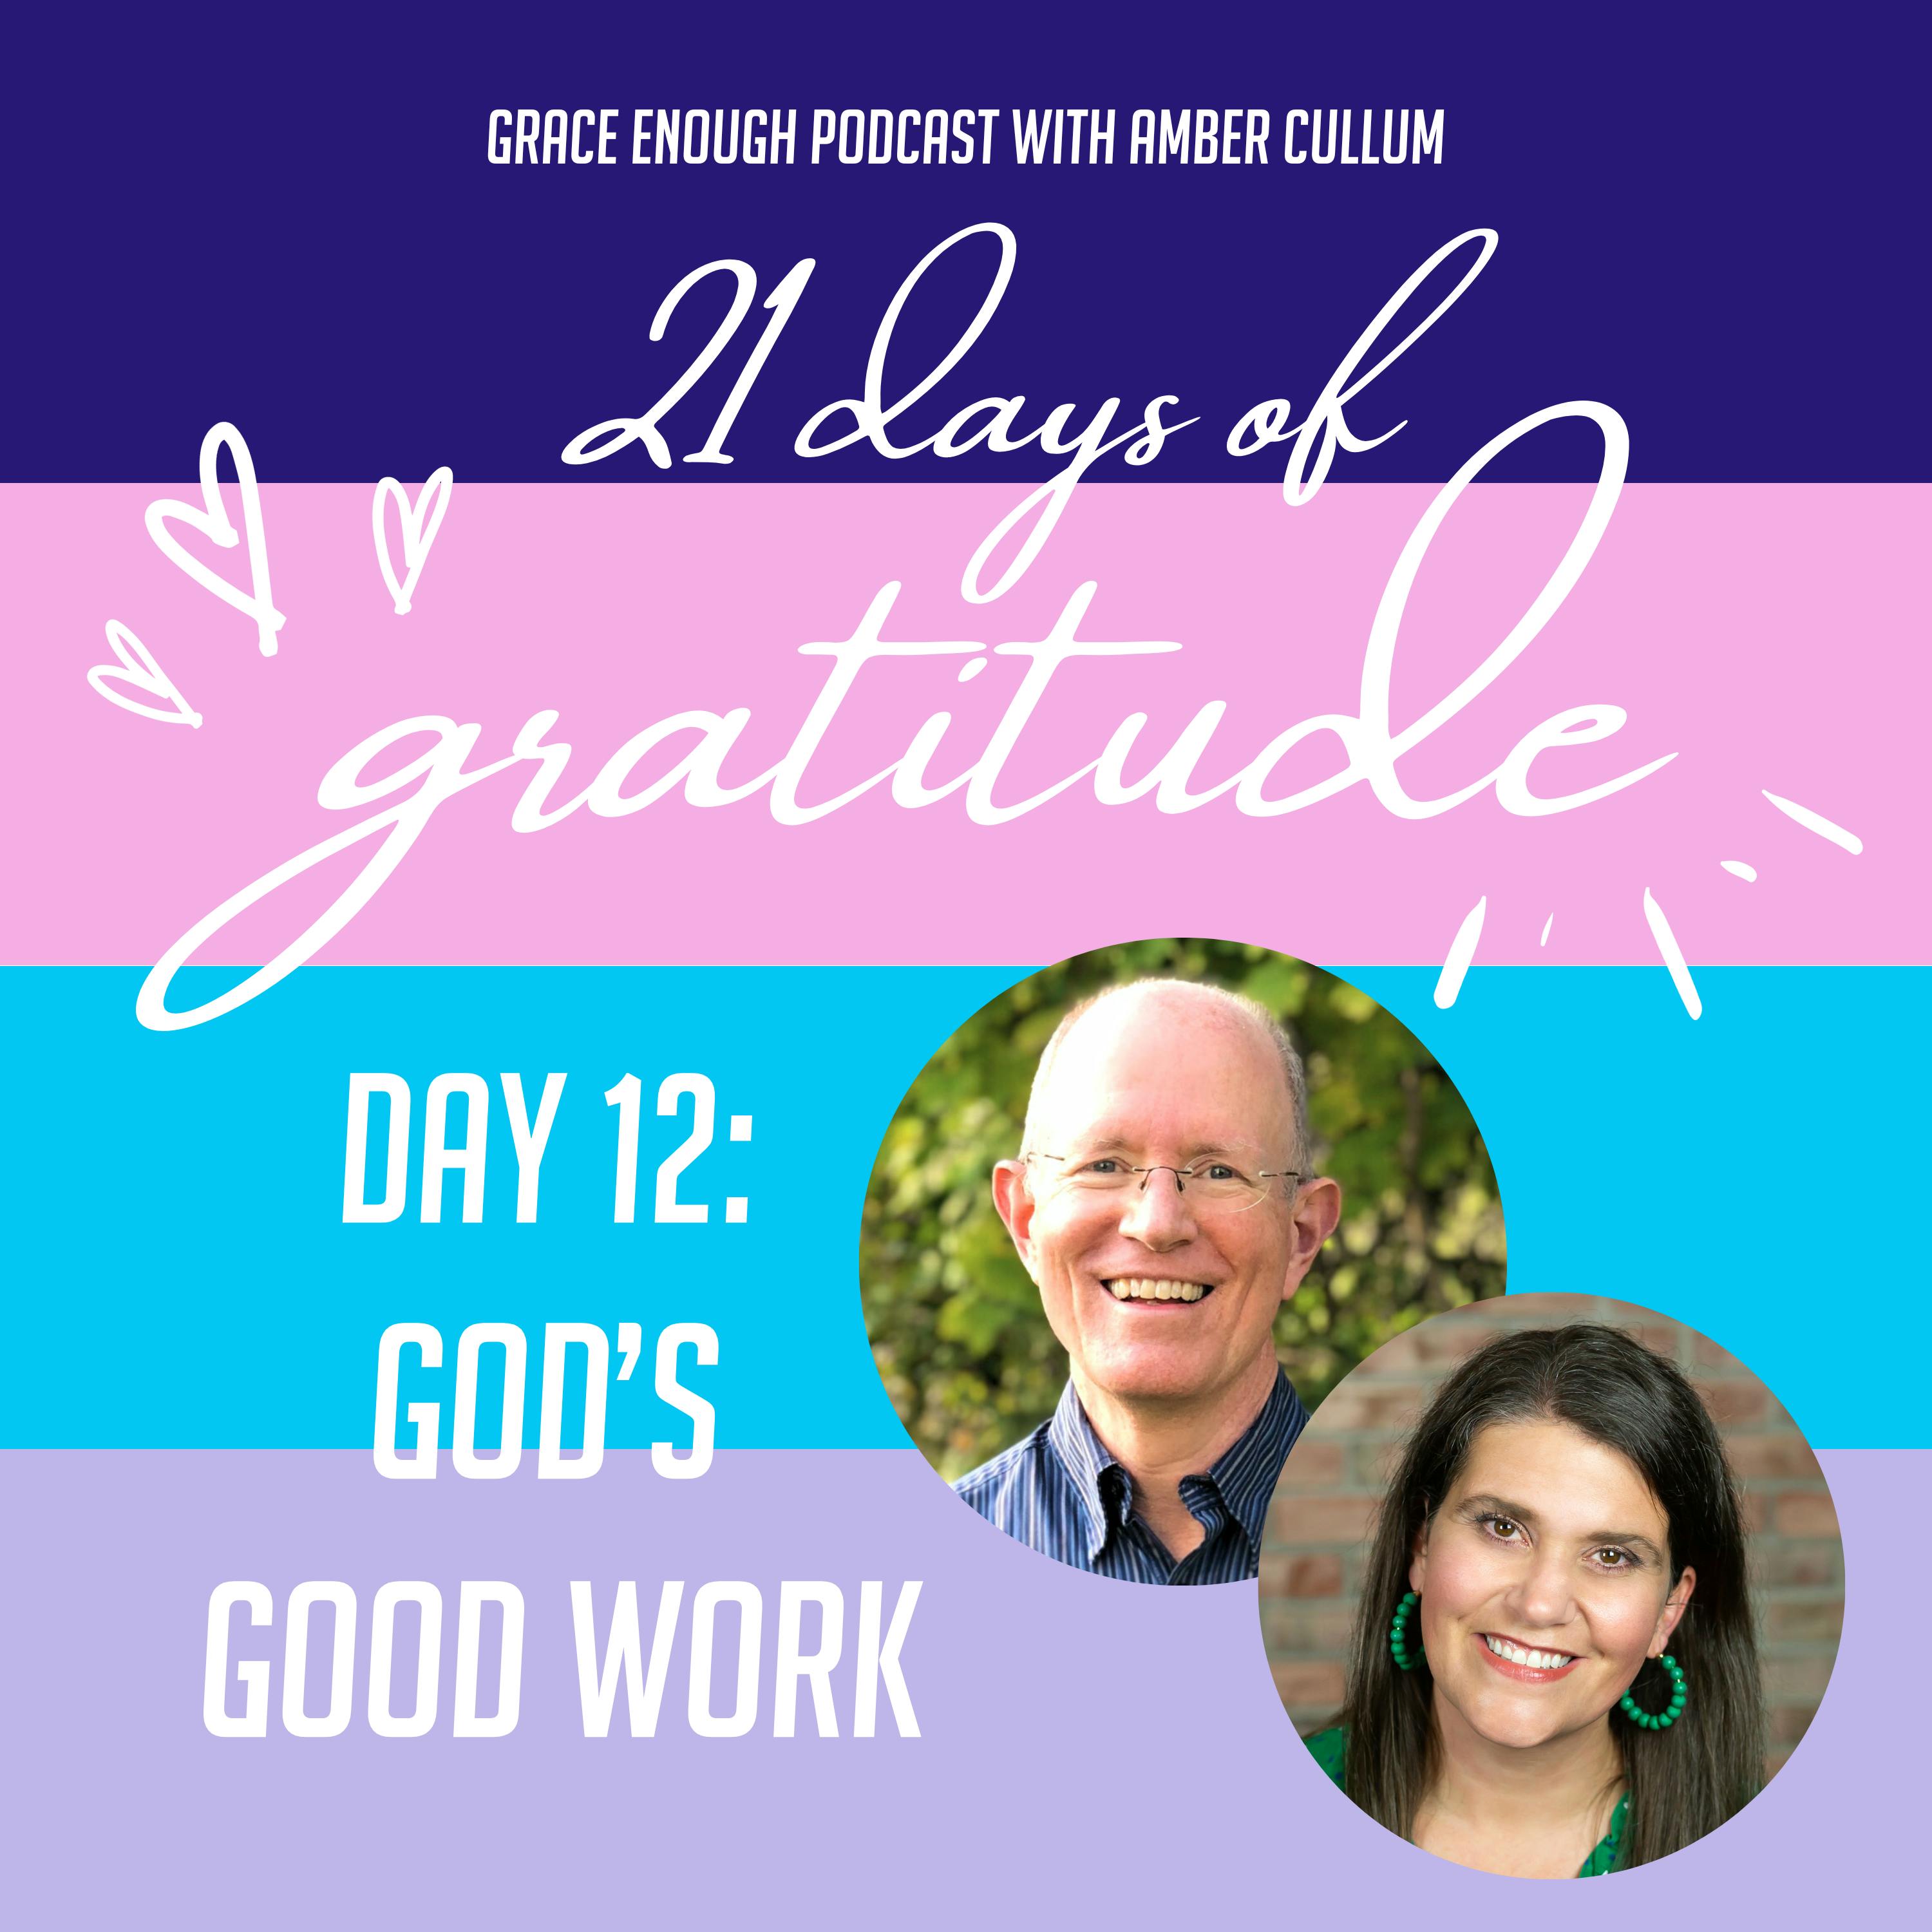 12/21 Days of Gratitude: God's Good Work feat. James Early